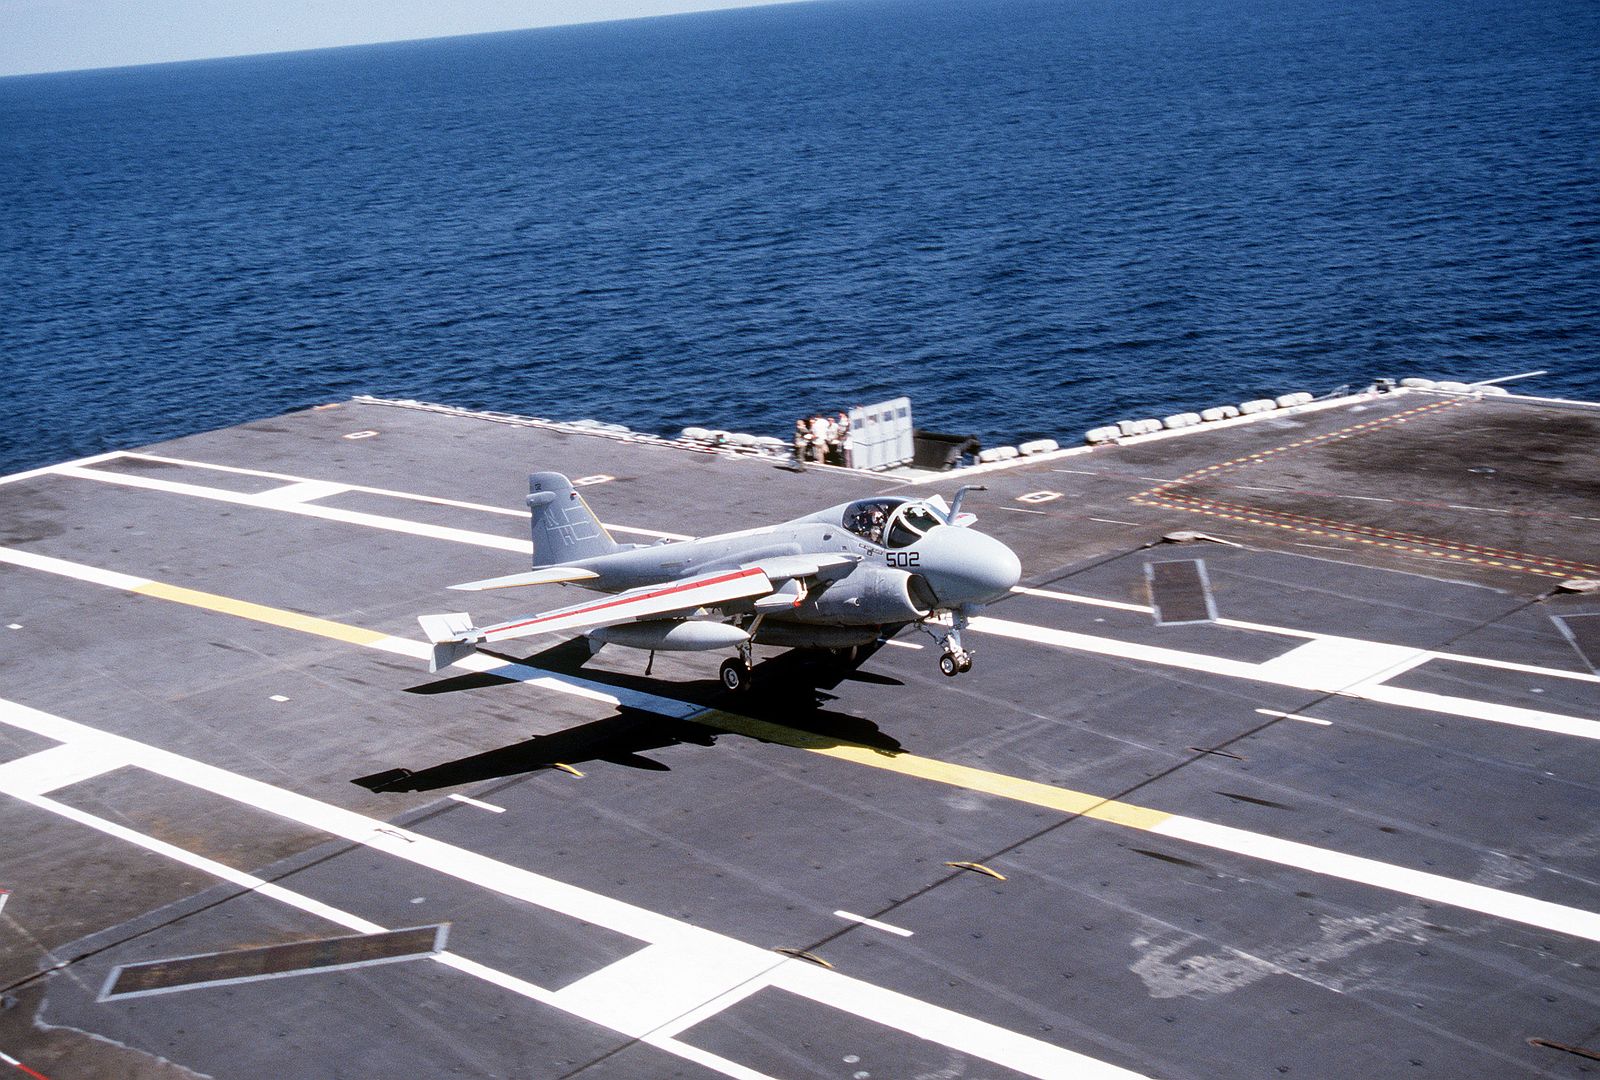 An Attack Squadron 95 A 6E Intruder Aircraft Comes In For A Landing On The Flight Deck Of The Nuclear Powered Aircraft Carrier USS ABRAHAM LINCOLN 1